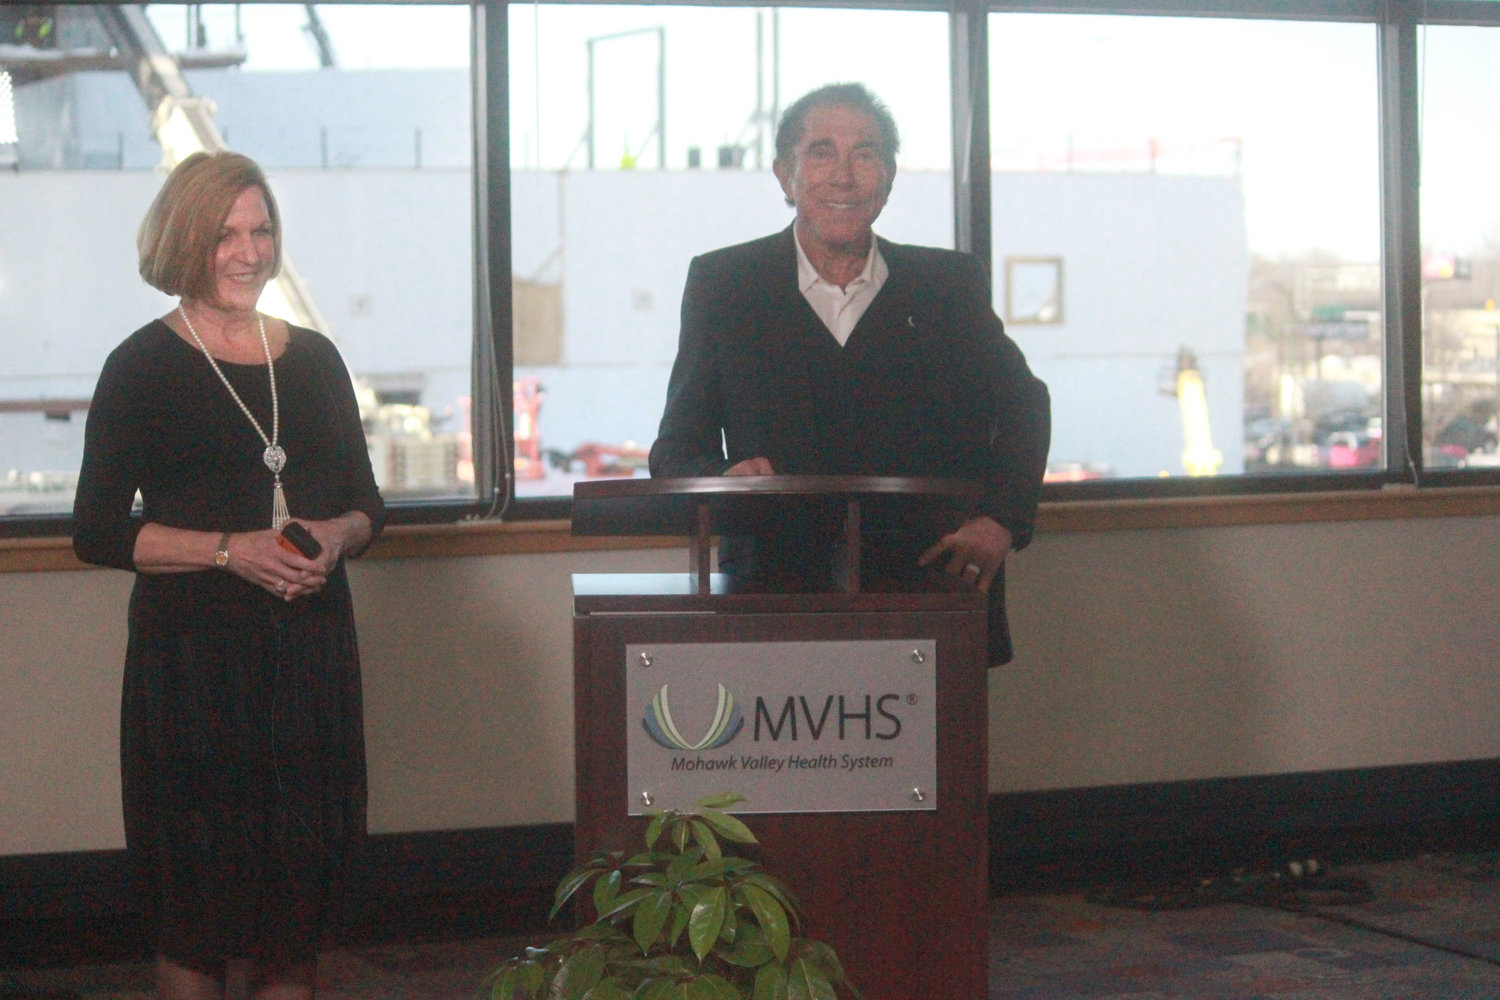 BRIGHT FUTURE — Darlene Stromstad, FACHE, president and CEO of MVHS and Steve Wynn announce the Wynn Family Foundation's $50 million donation to help further healthcare services in the Mohawk Valley region.